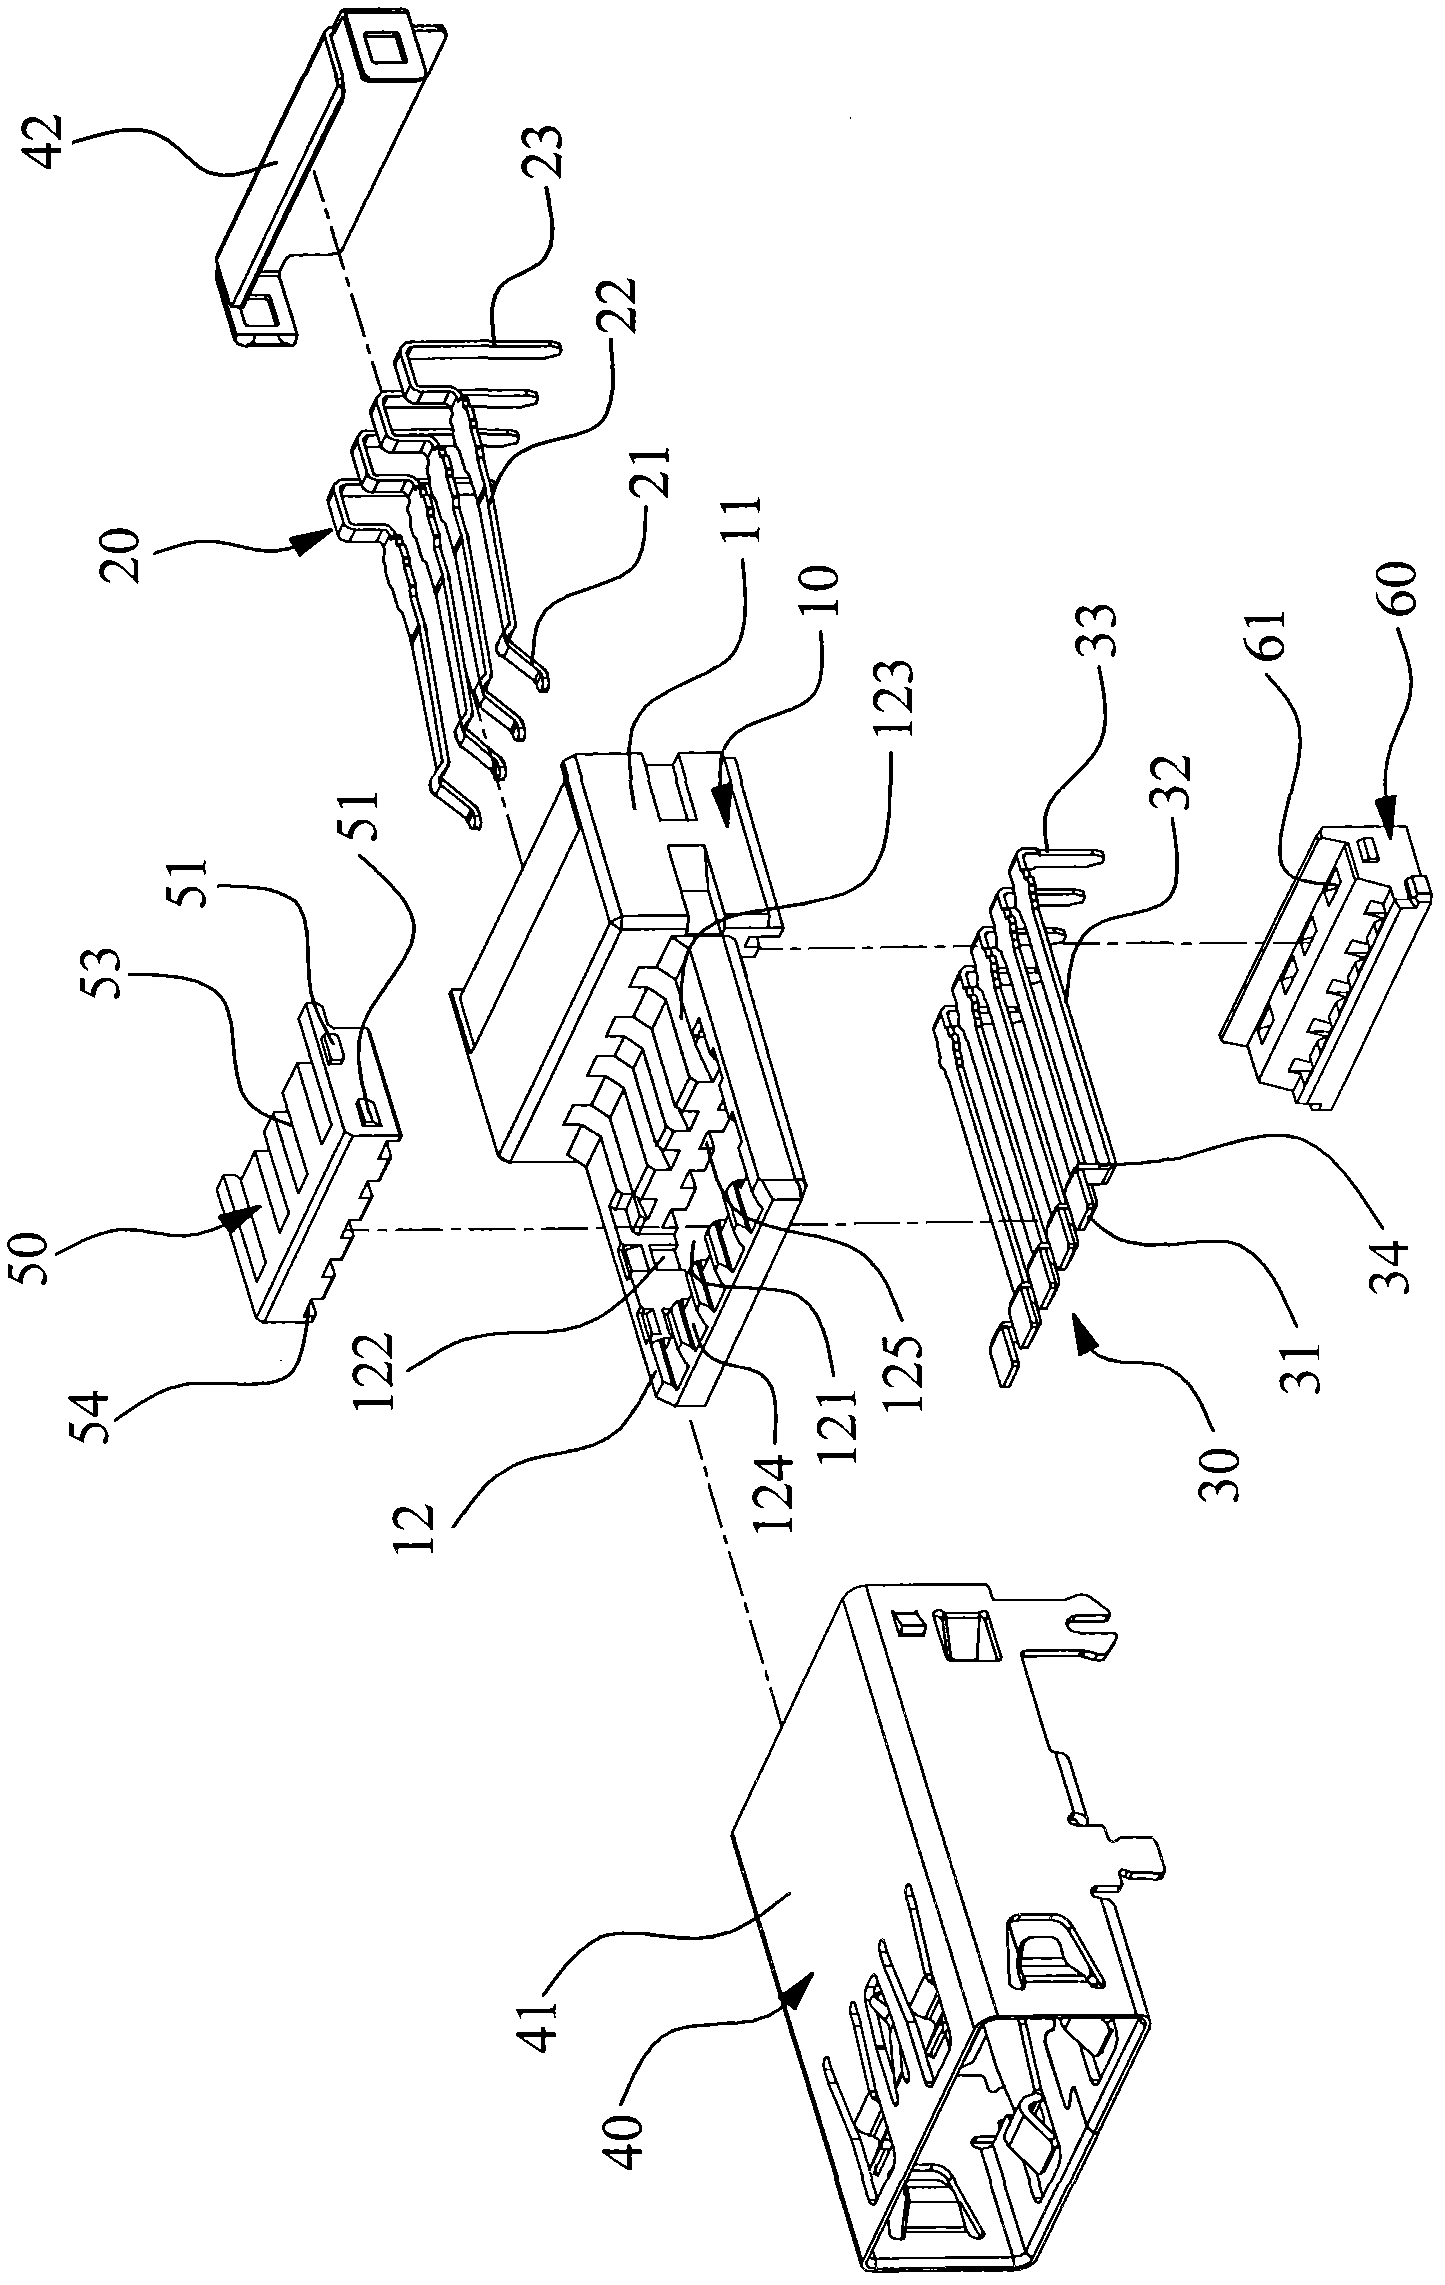 Electric connector and assembly method thereof